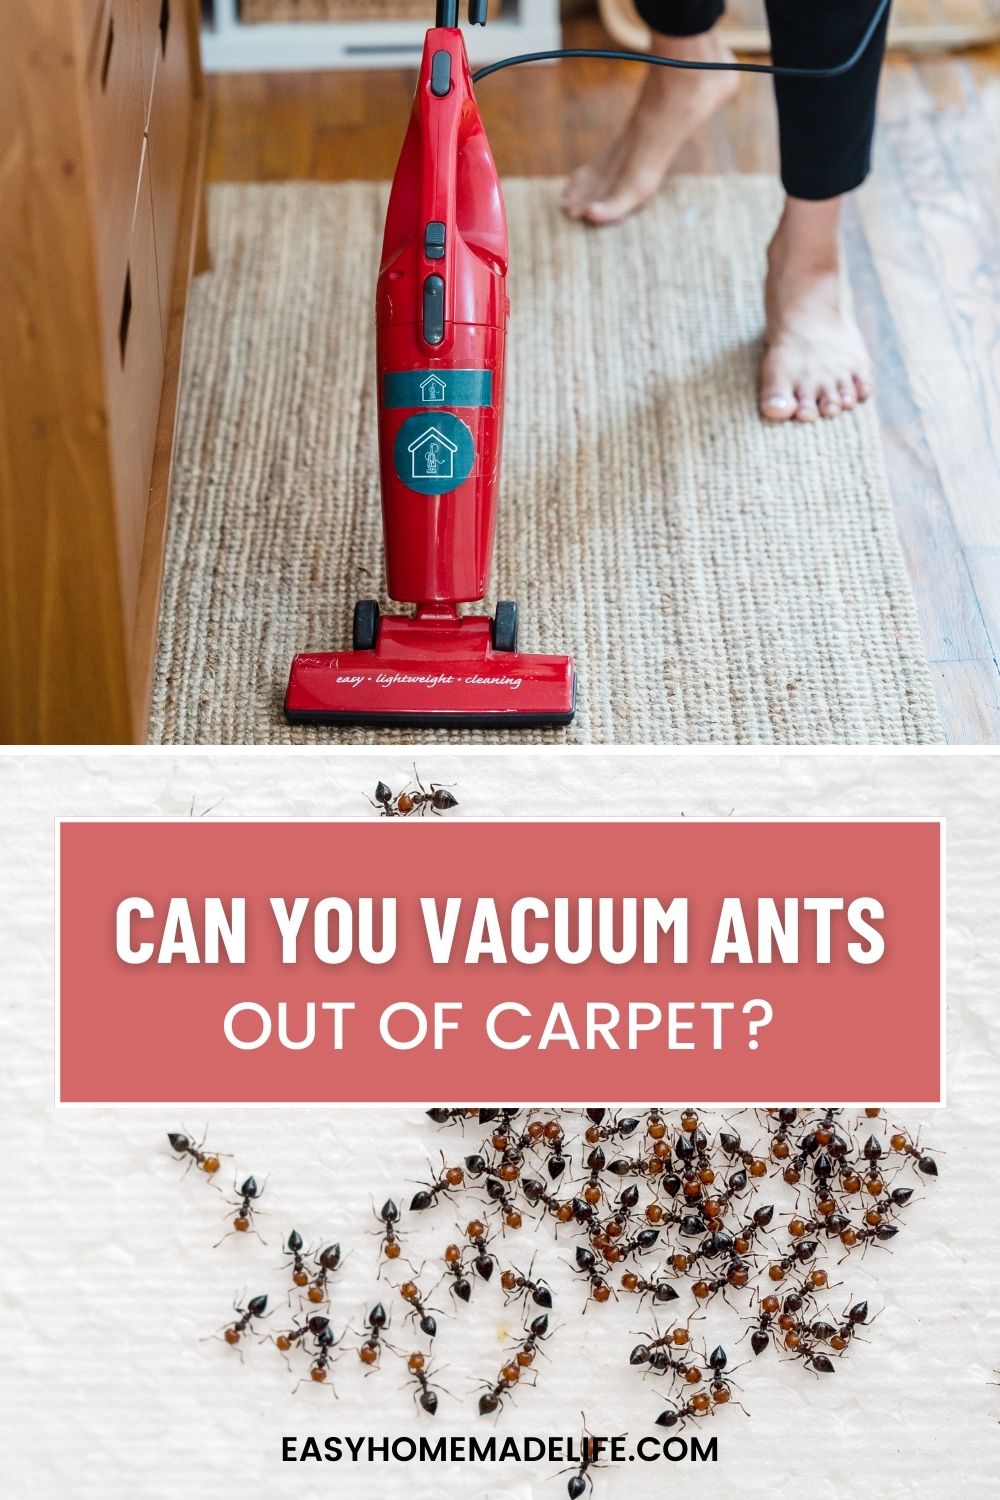 Can You Vacuum Ants Out of Carpet